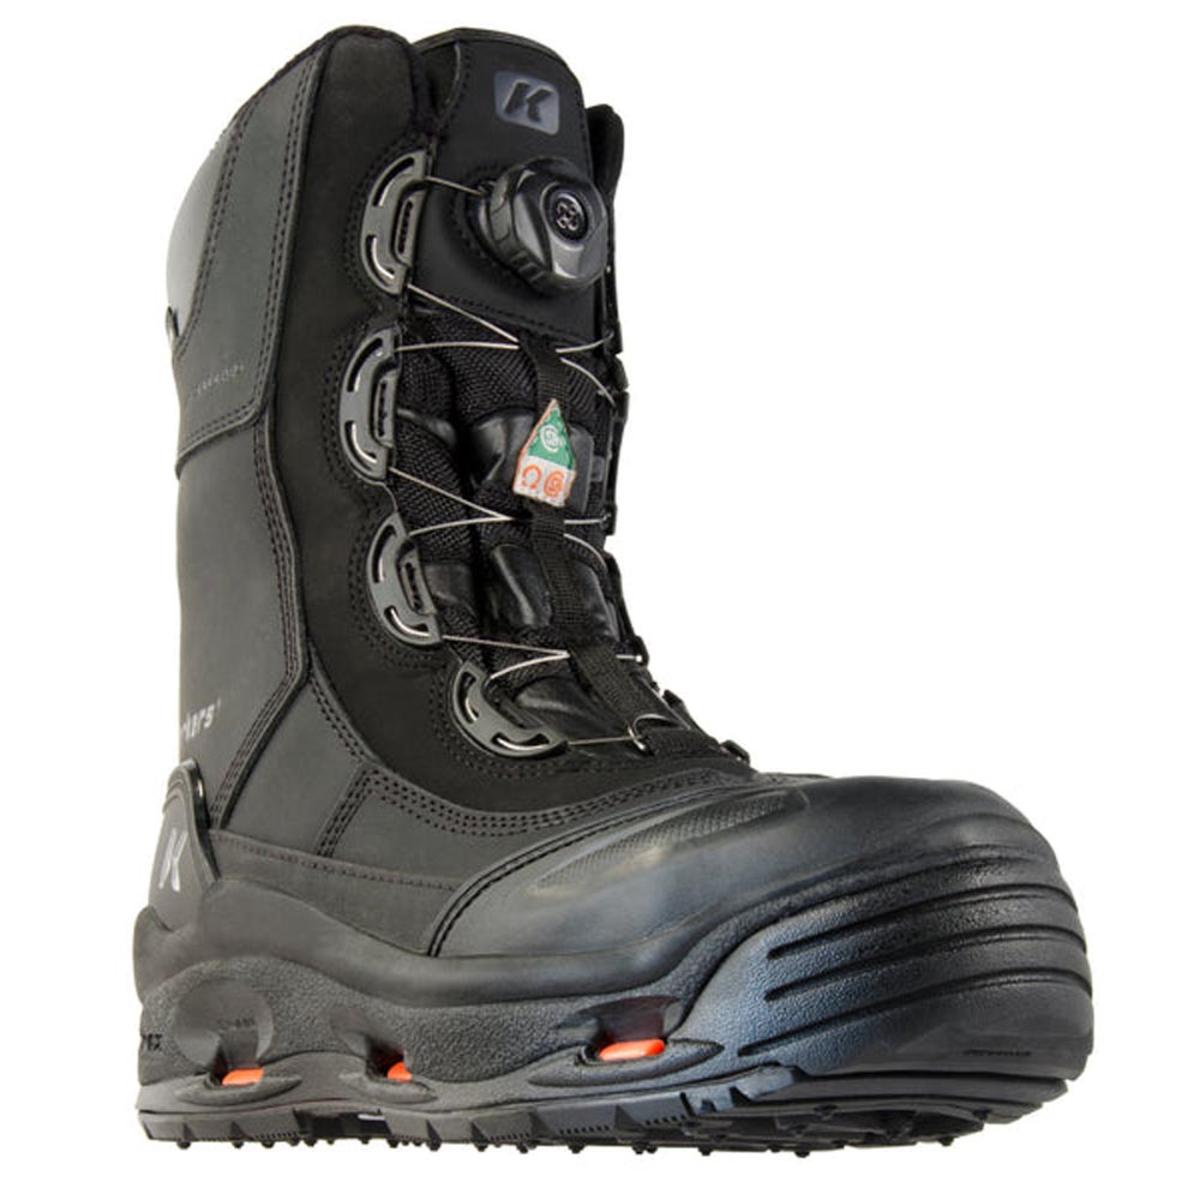 Korkers Men's IceJack Pro Safety Winter Work Boots with Ninety Degree Sole